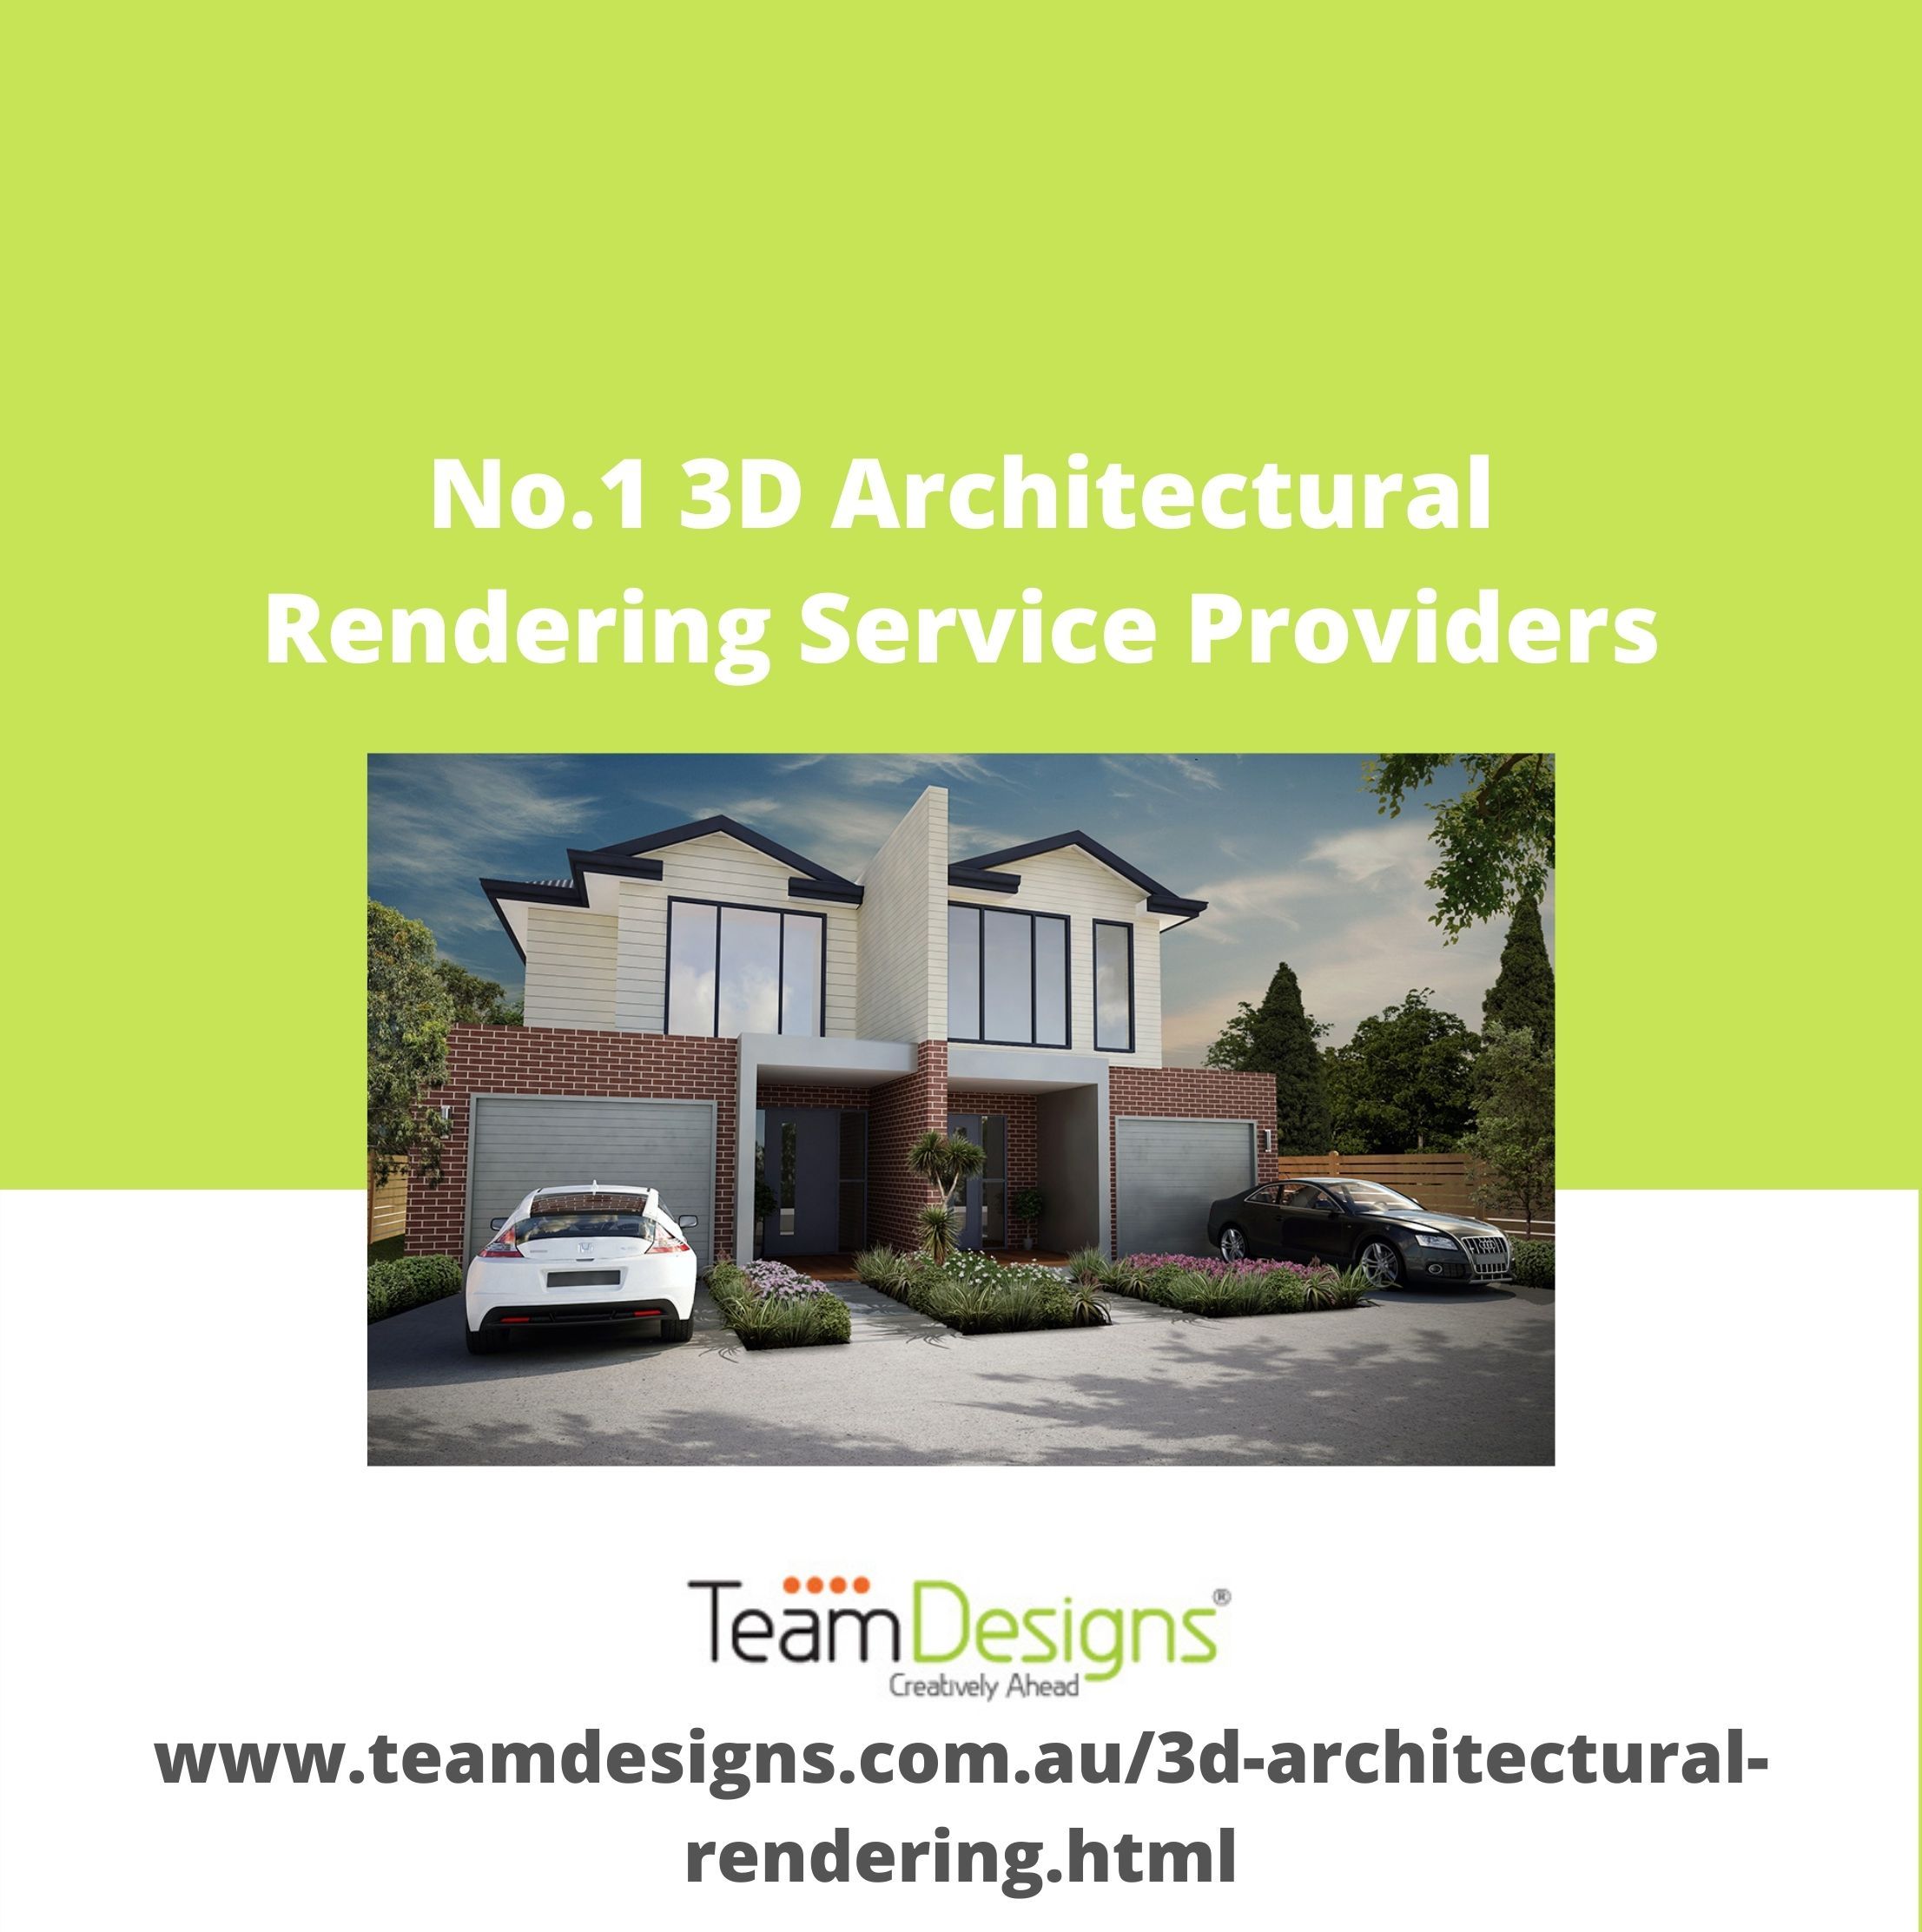 3D Architectural Rendering Services in Australia